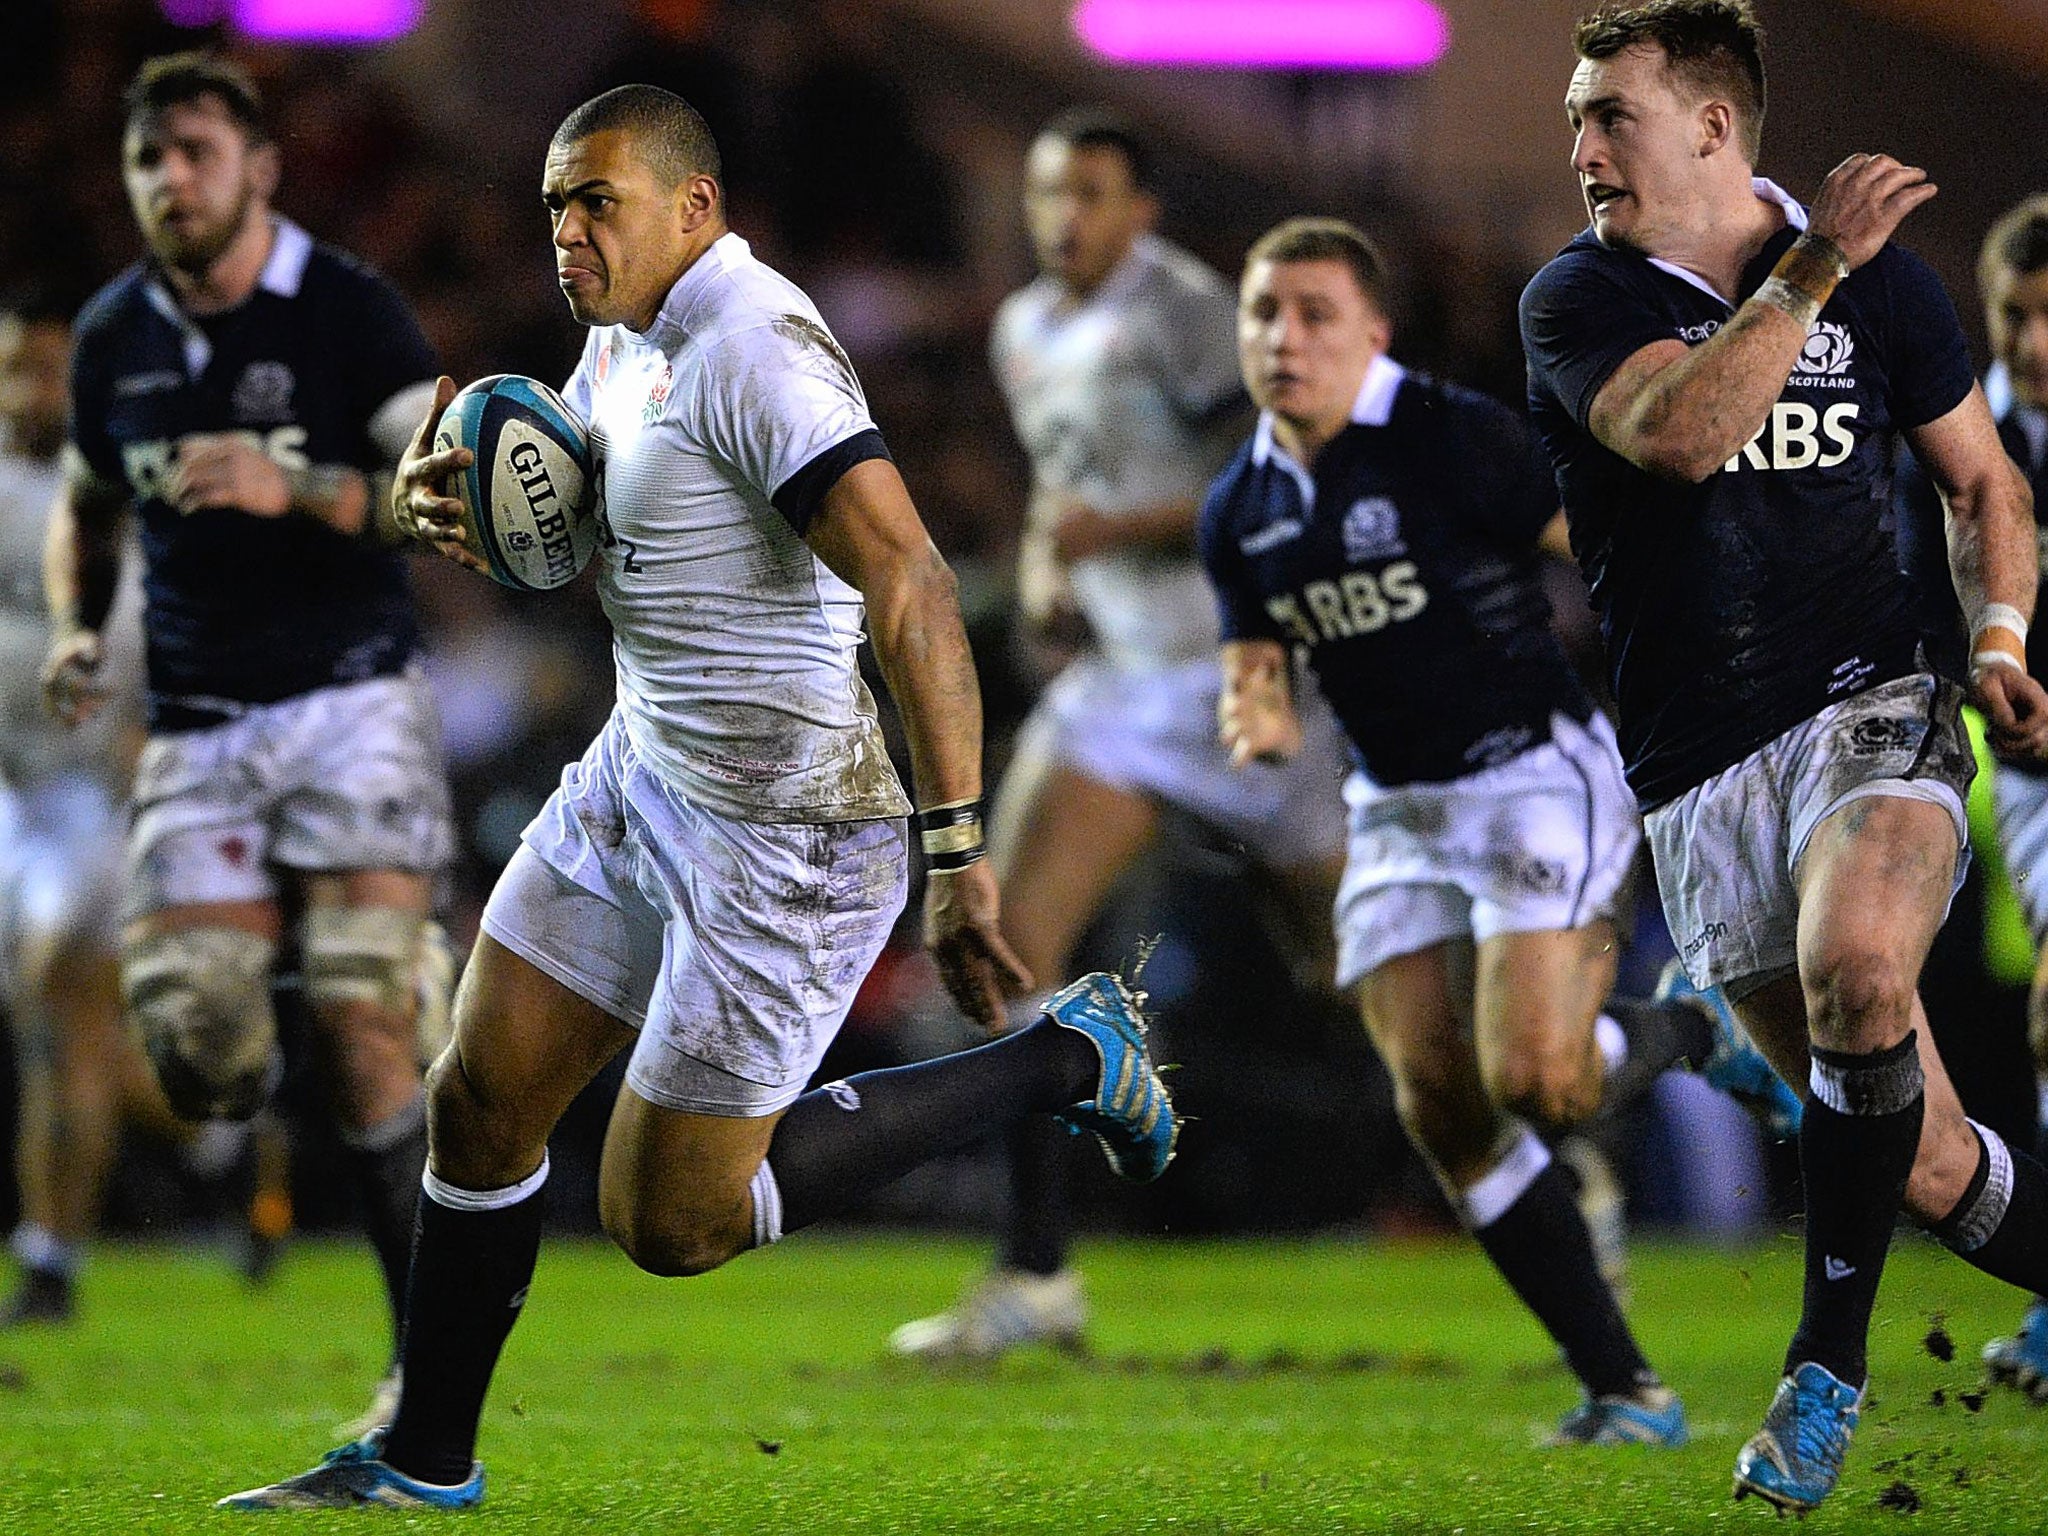 England’s Luther Burrell charges for the Scots line